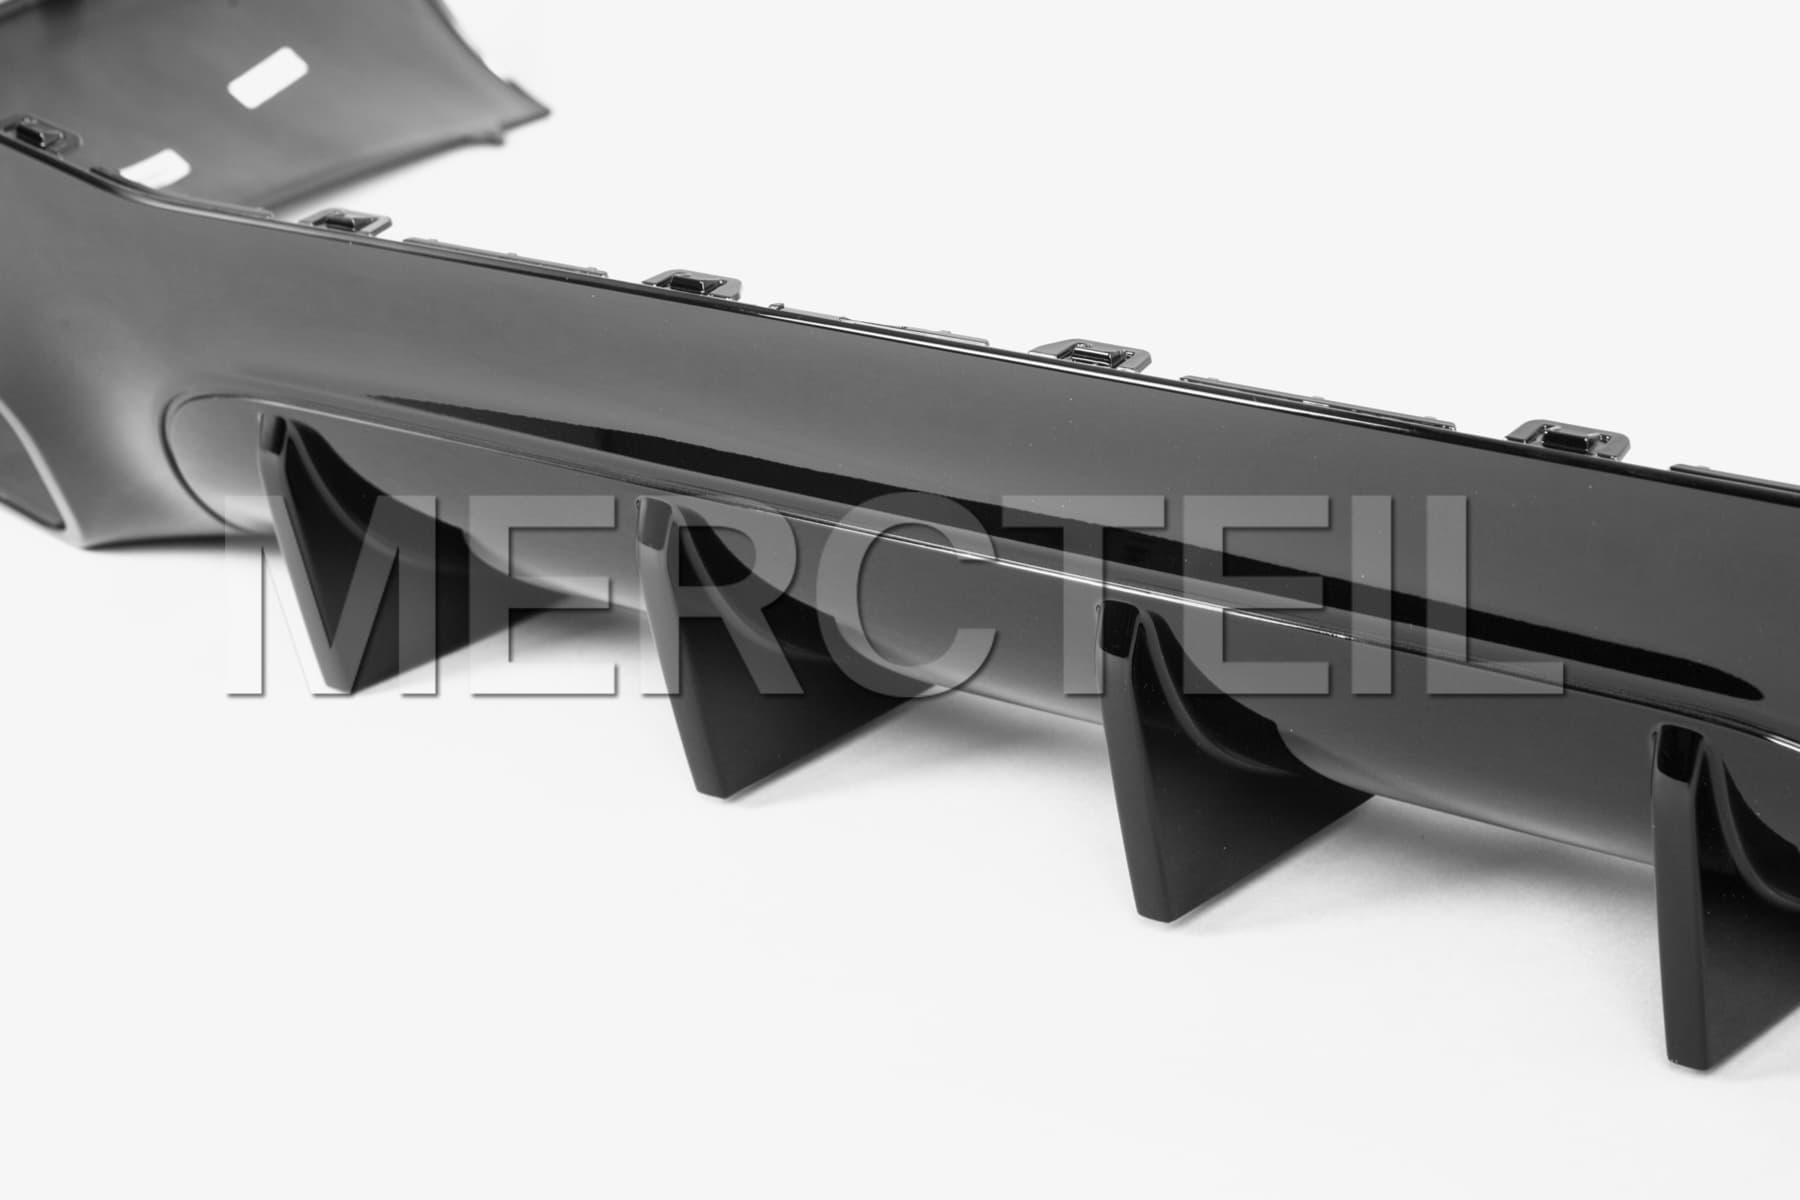 AMG Rear Diffuser Aerodynamic Package for AMG GT (part number: A2908850202)